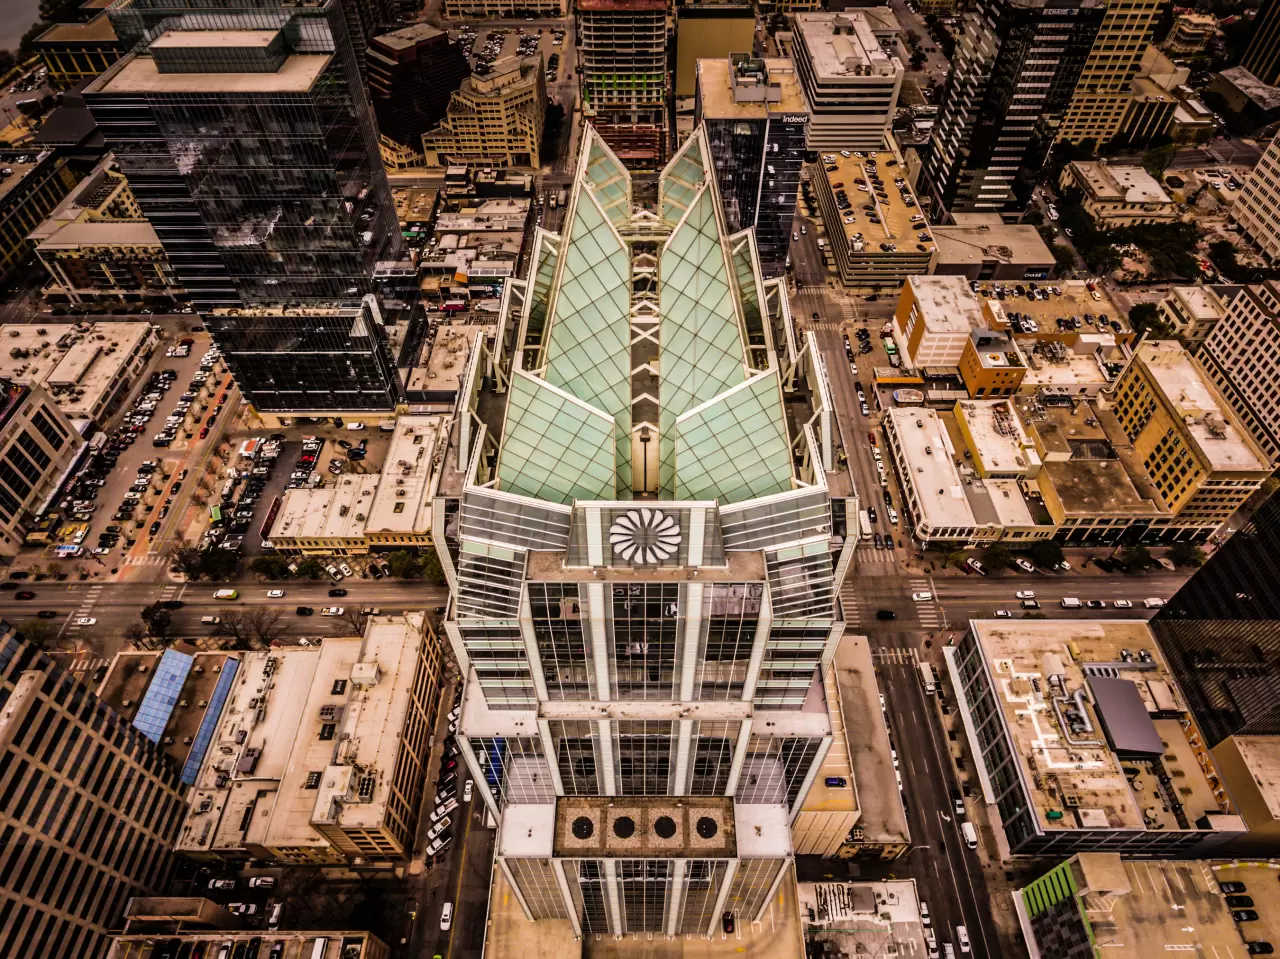 Austin Texas Aerial Drone Photograph of the Frost Bank Tower Building aka The Owl Building by Helios Visions Professional Commercial Drone Services. img#1